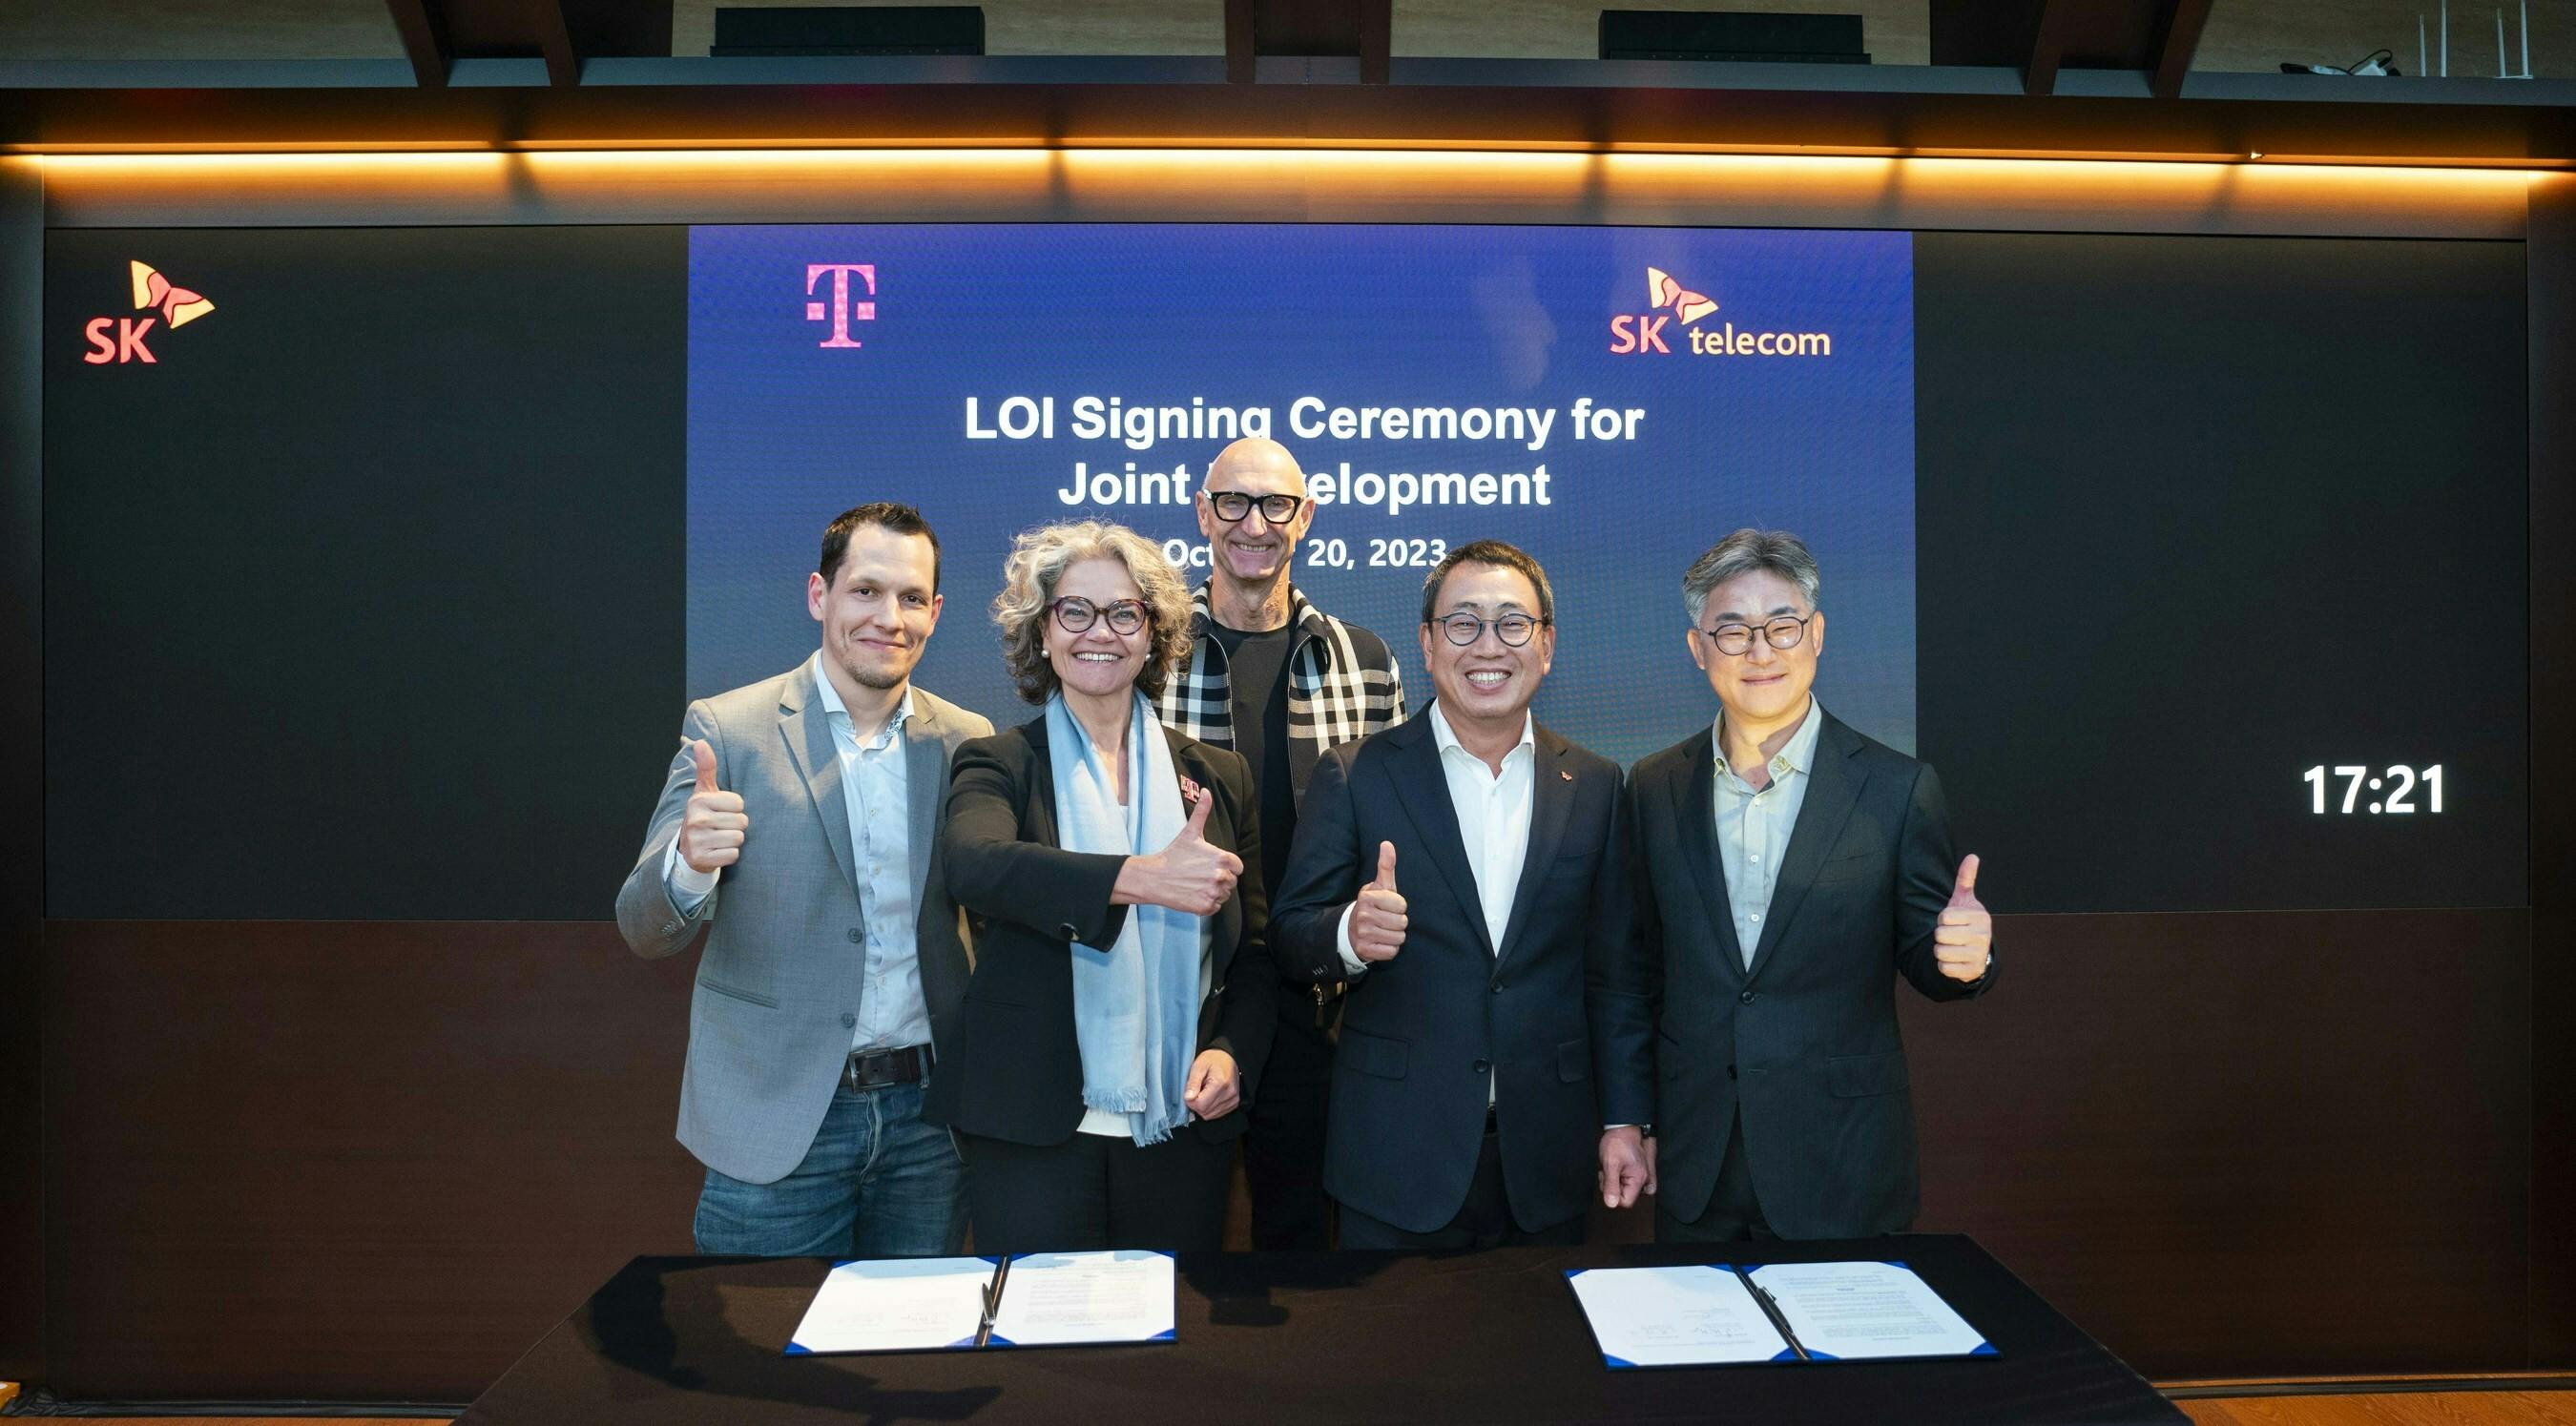 https://d300zch48kanqv.cloudfront.net/original_images/Photo__SK_Telecom_and_Deutsche_Telekom_to_Jointly_Develop_Telco_specific_L.jpg